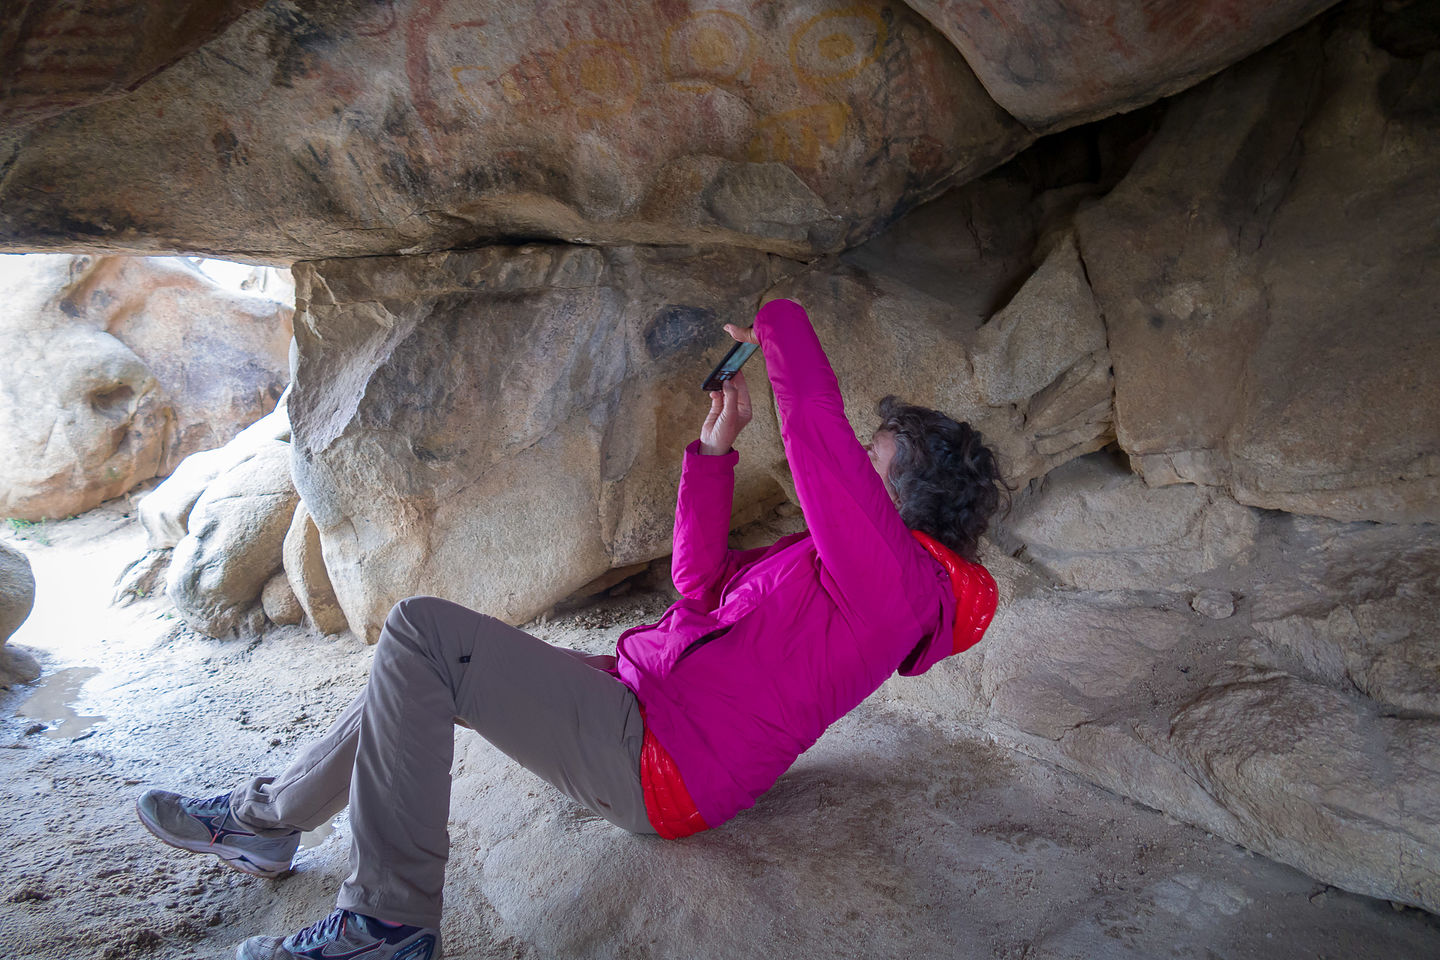 Lolo photographing the cave paintings